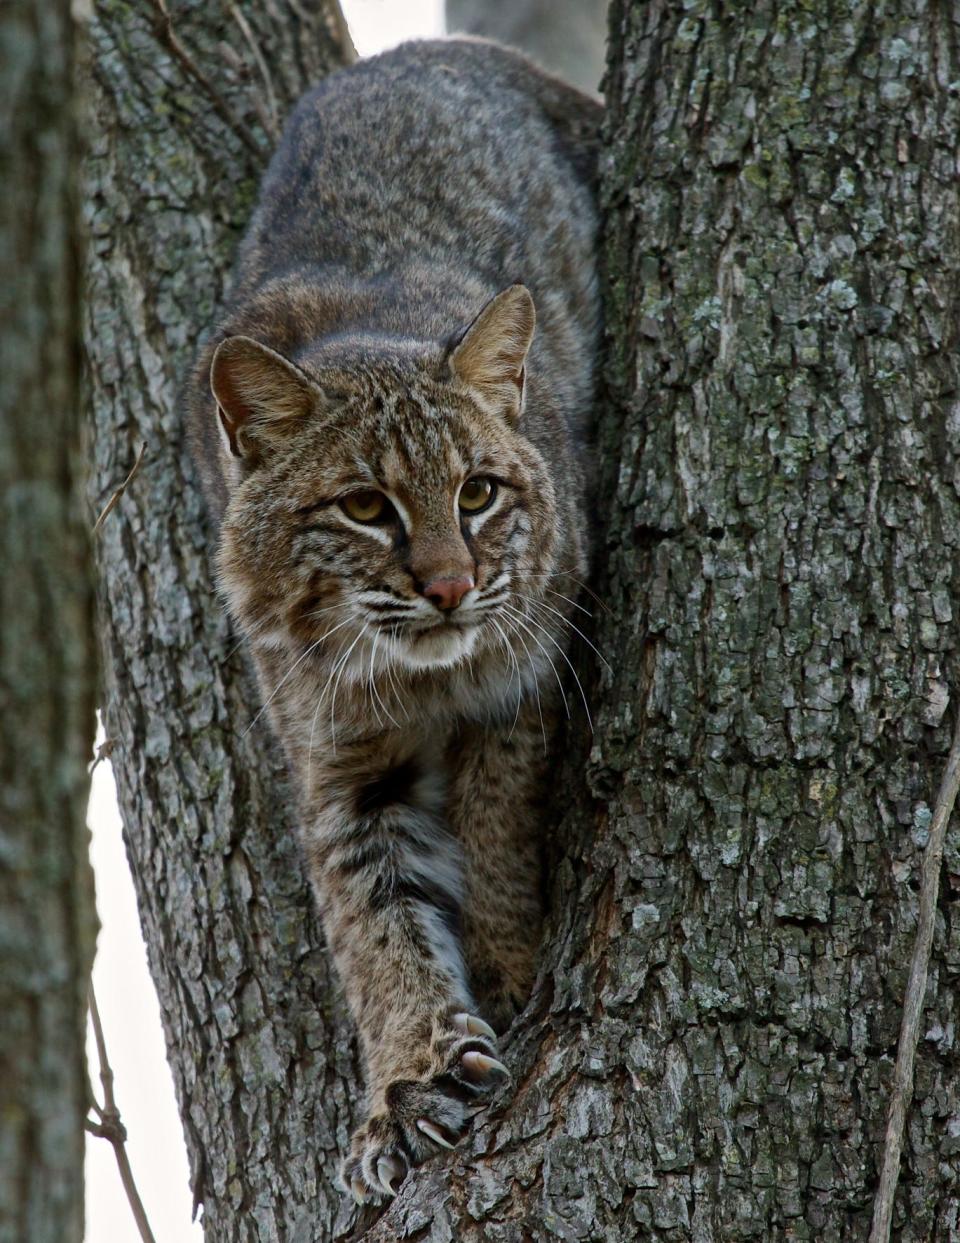 Bobcats are about twice the size of domestic cats. They are occasionally seen on Cape Cod, likely crossing the bridges to get here. Experts think we could see a larger population of the felines on the Cape in the years ahead.  This image, from the U.S. Fish and Wildlife Service, shows an off-Cape bobcat.